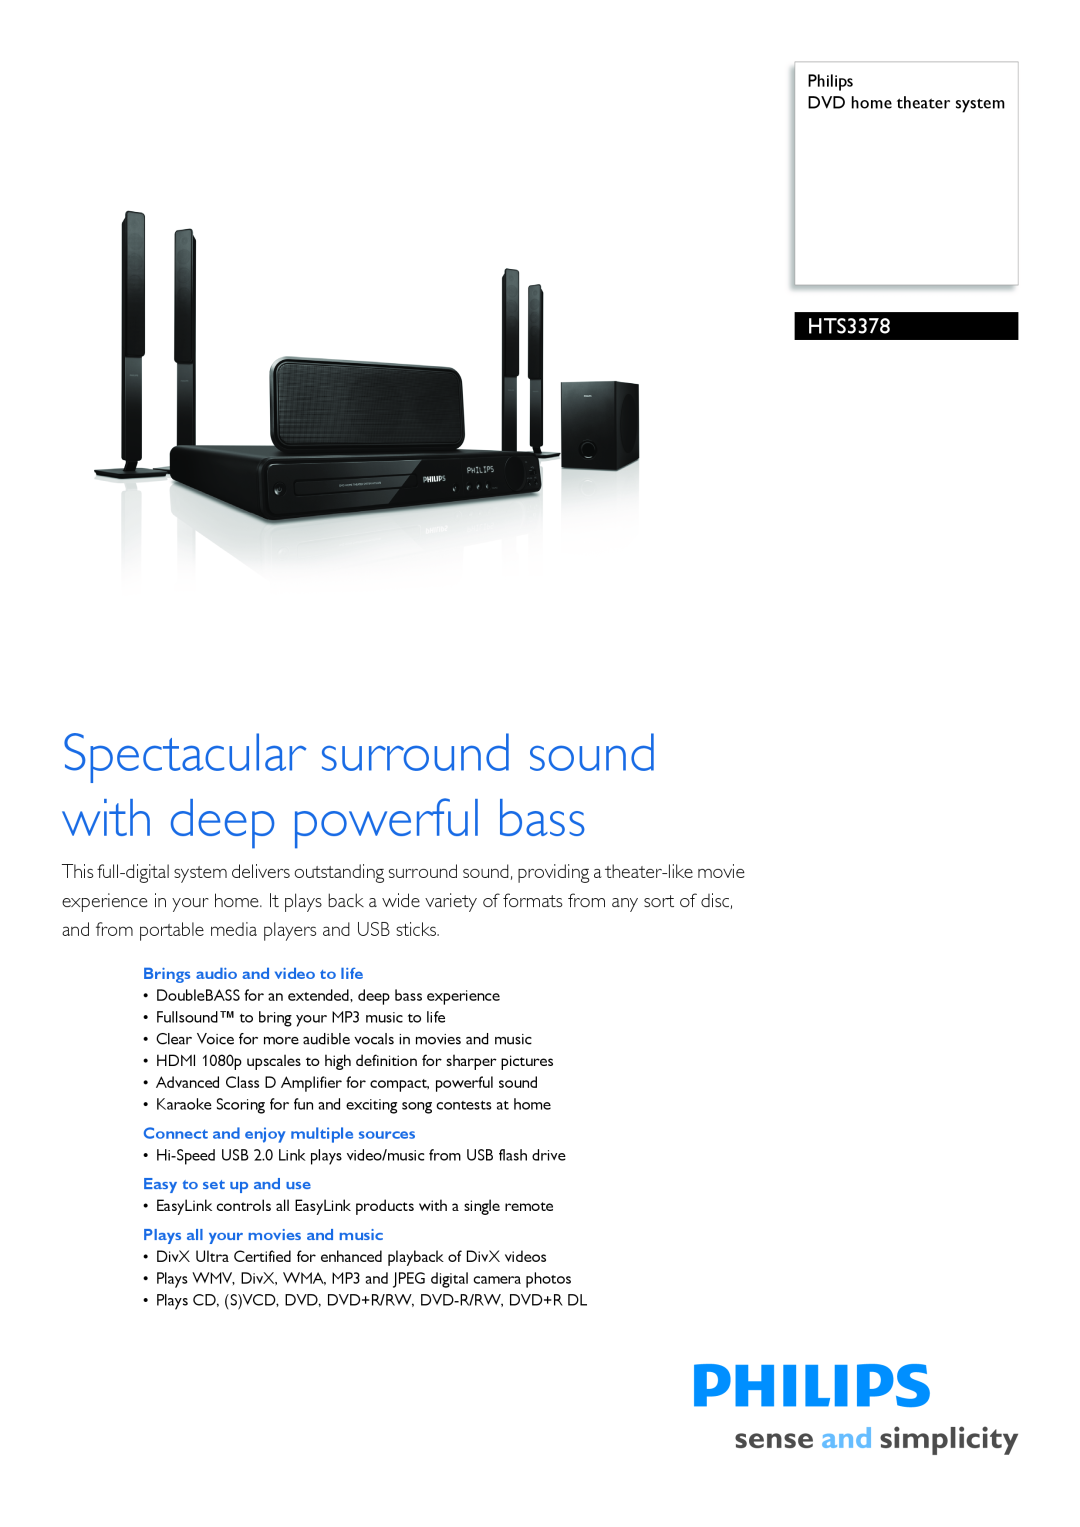 Philips HTS3378/98 manual Philips DVD home theater system, Brings audio and video to life, Easy to set up and use 